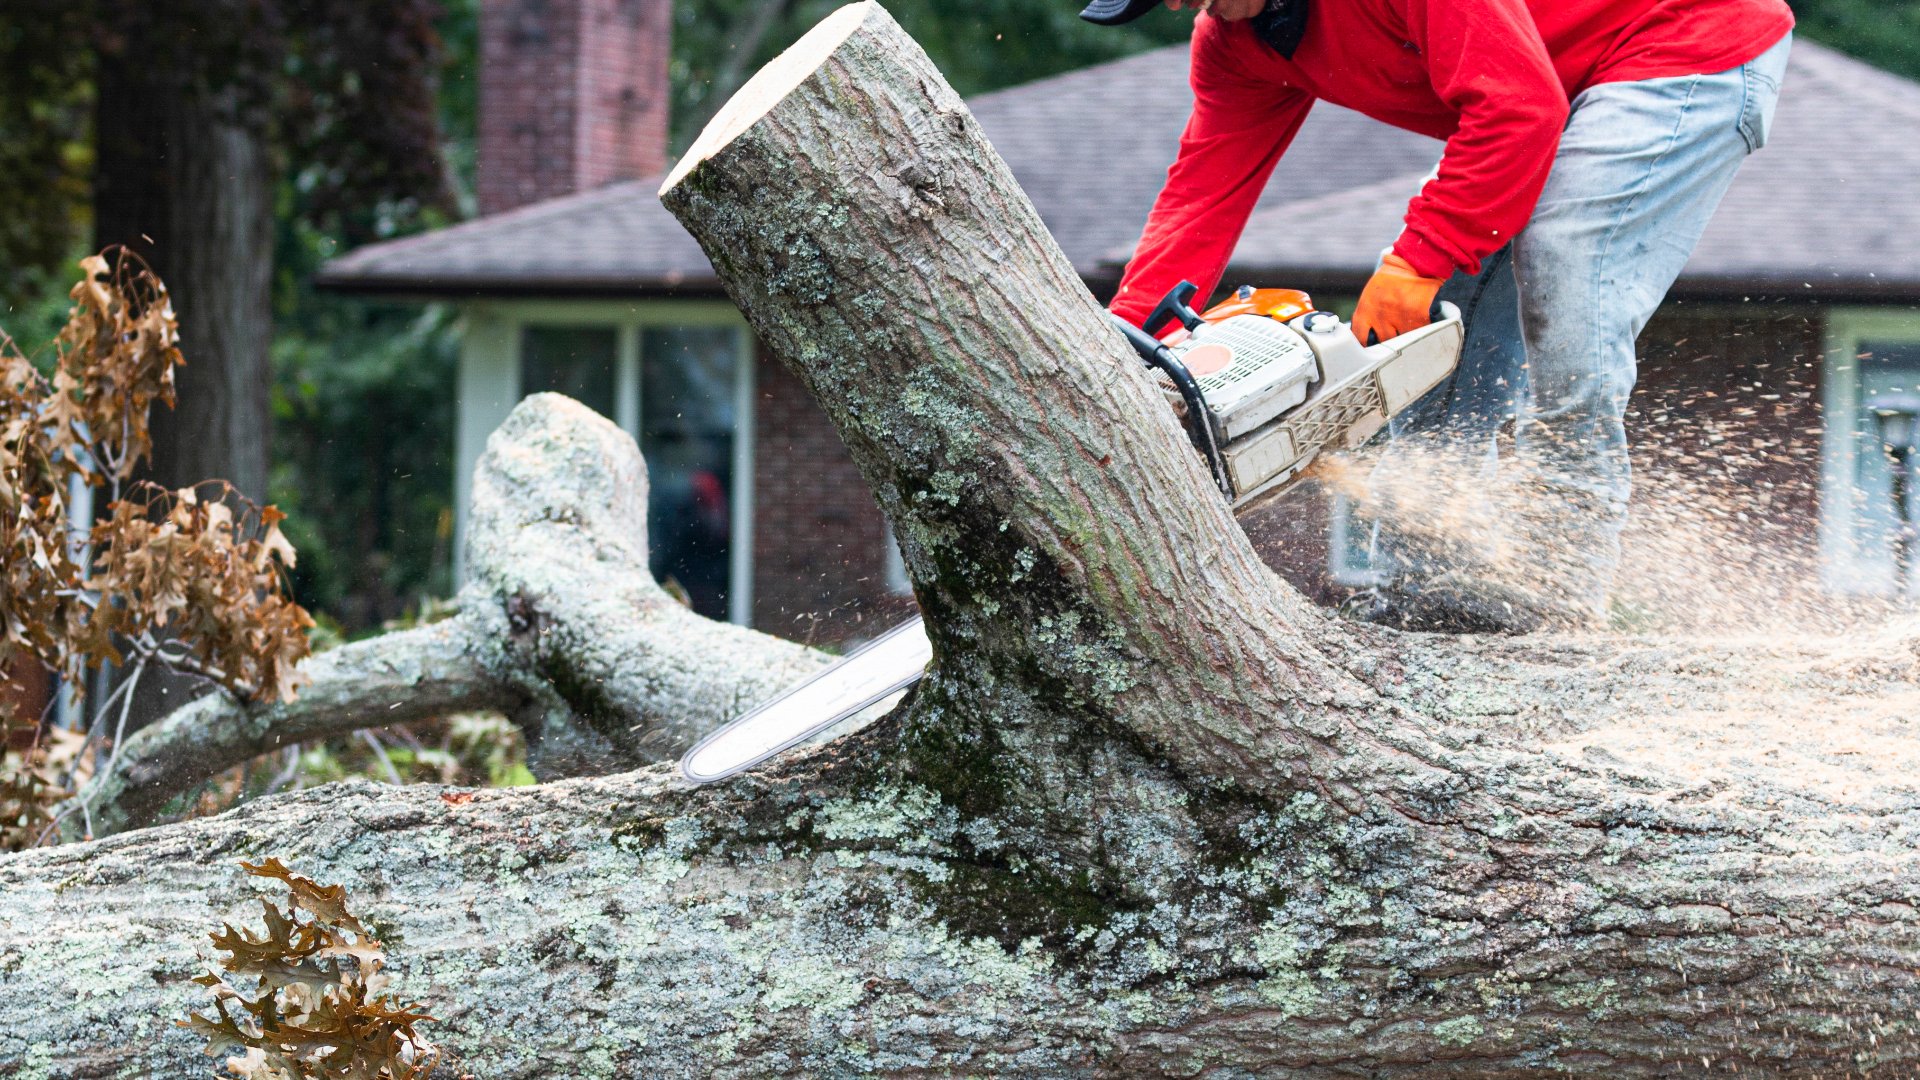 DIY Tree Removal Is a Bad Idea - Leave This Task to the Pros!